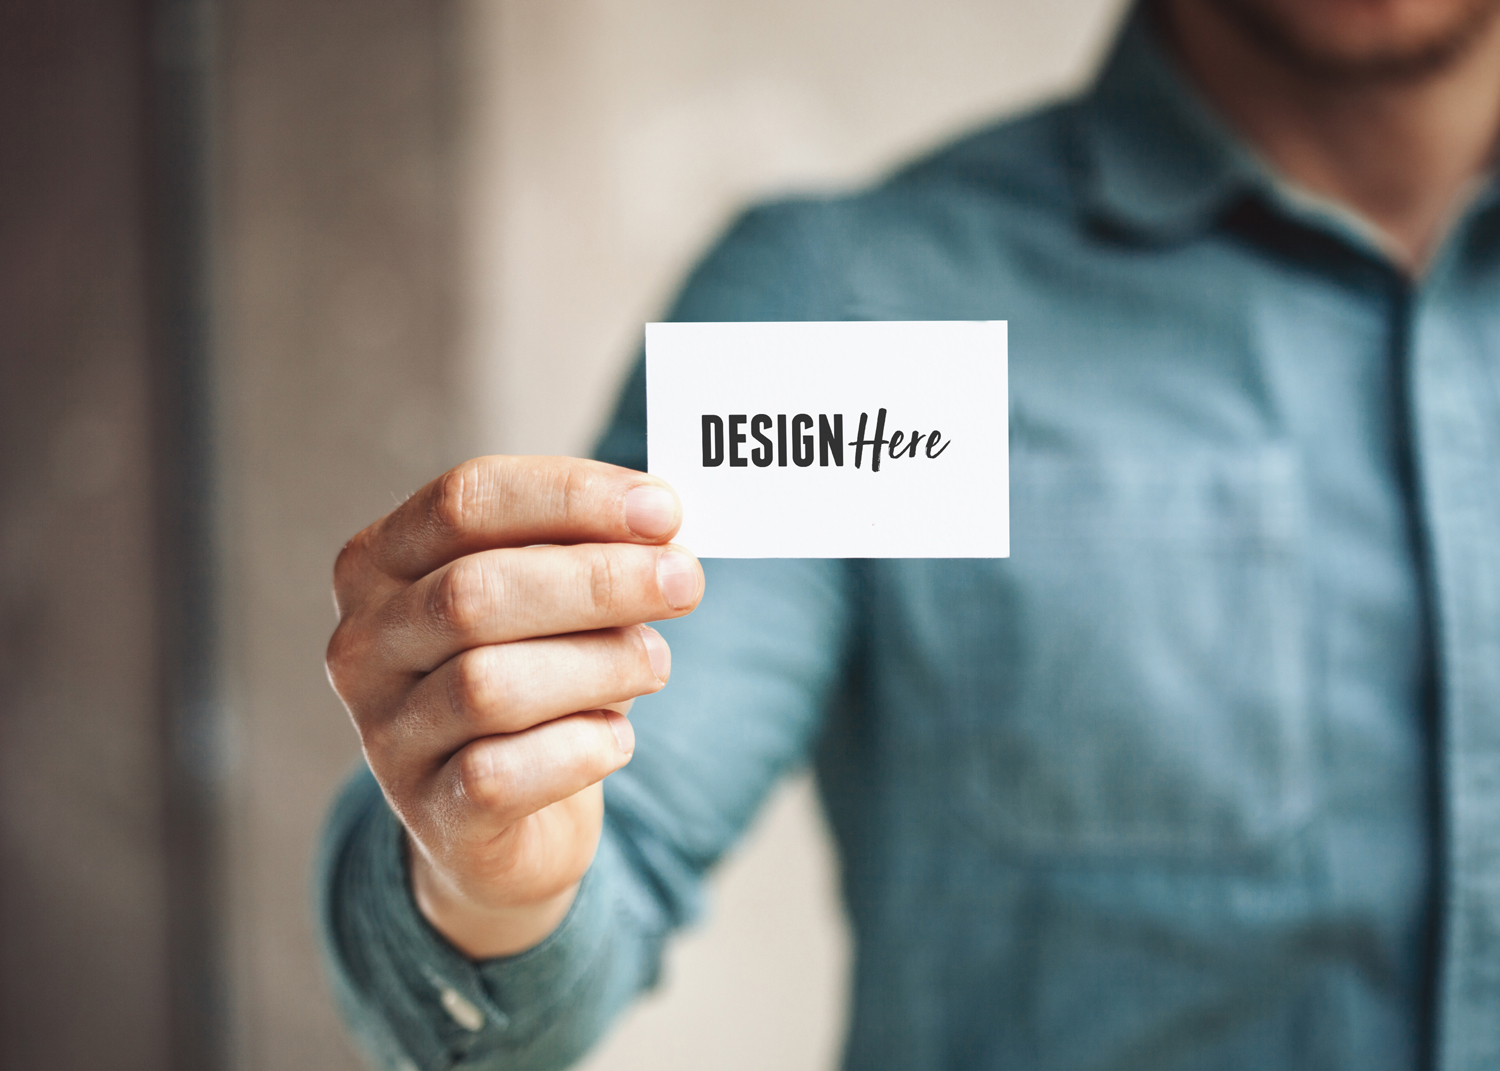 Mockup Templates For Graphic Designers